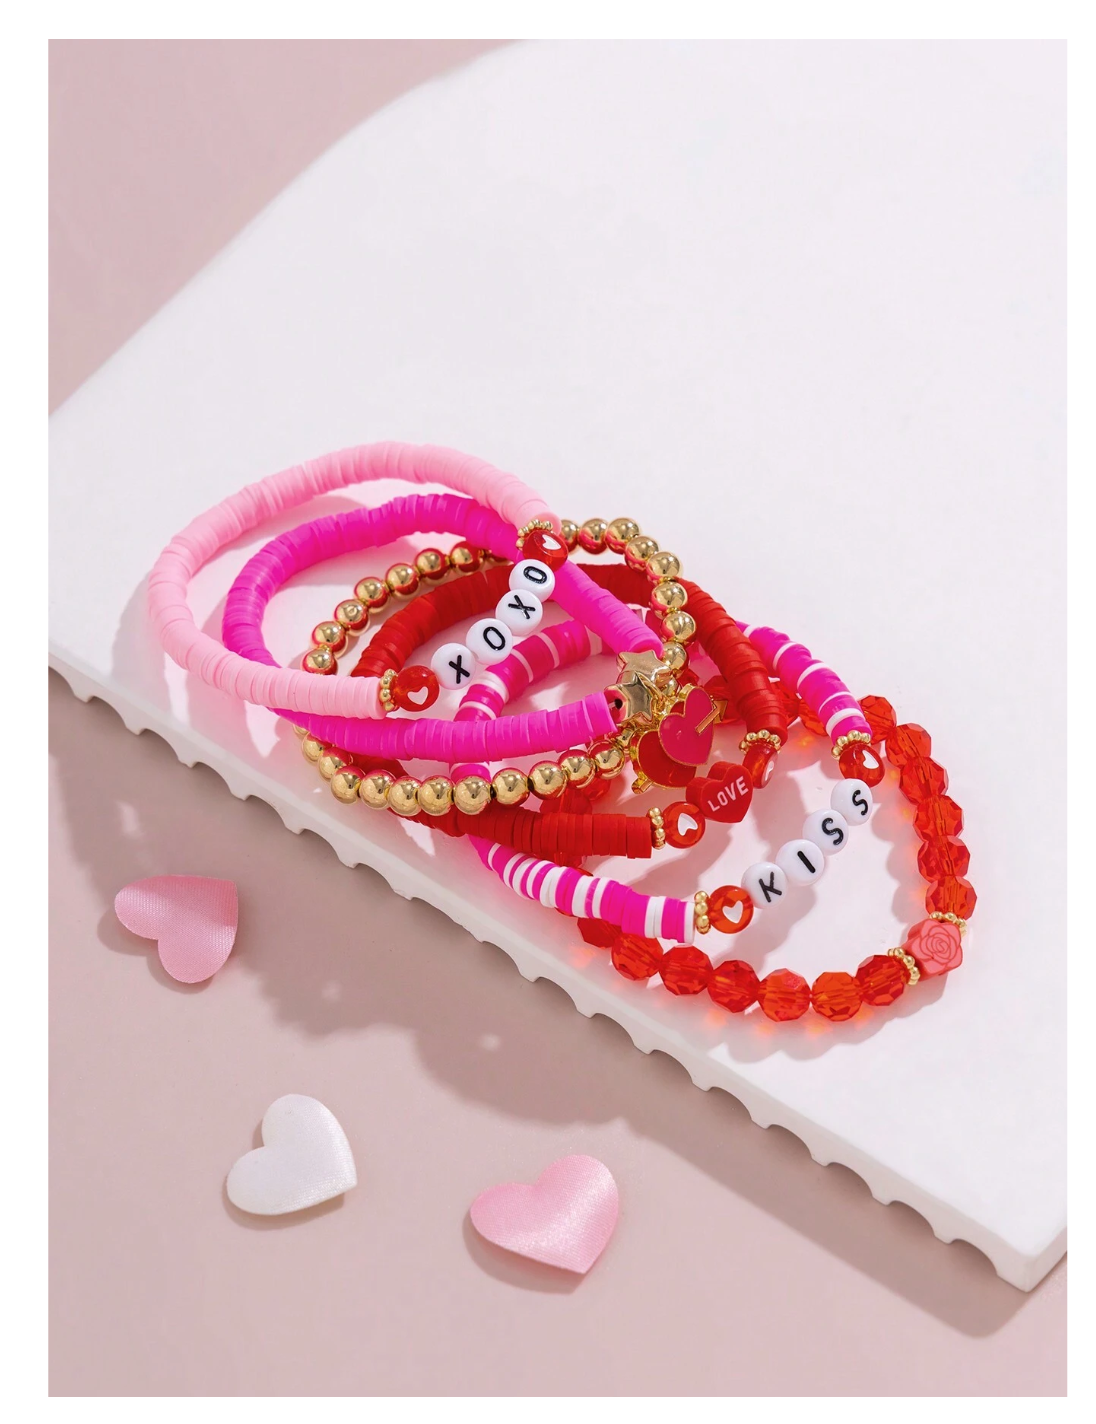 Charmingly Yours: ROMWE's 7pcs Kawaii Set - Sweet Hearts & Beaded Bliss for Daily Chic and Special Occasions!